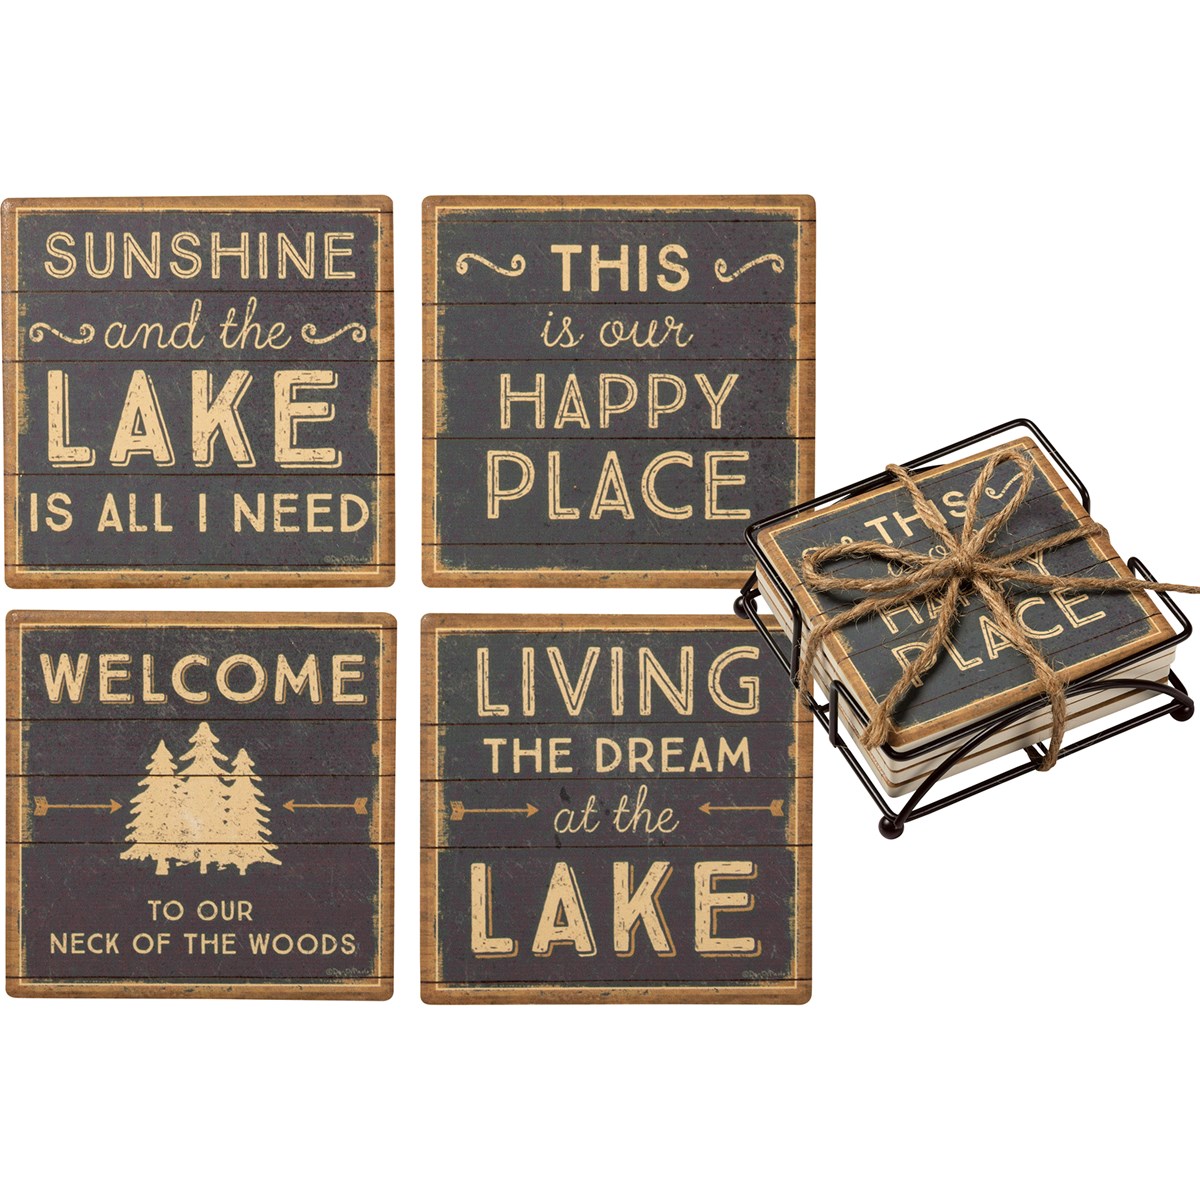 This Is Our Happy Place Lake Coaster Set - Stone, Metal, Cork